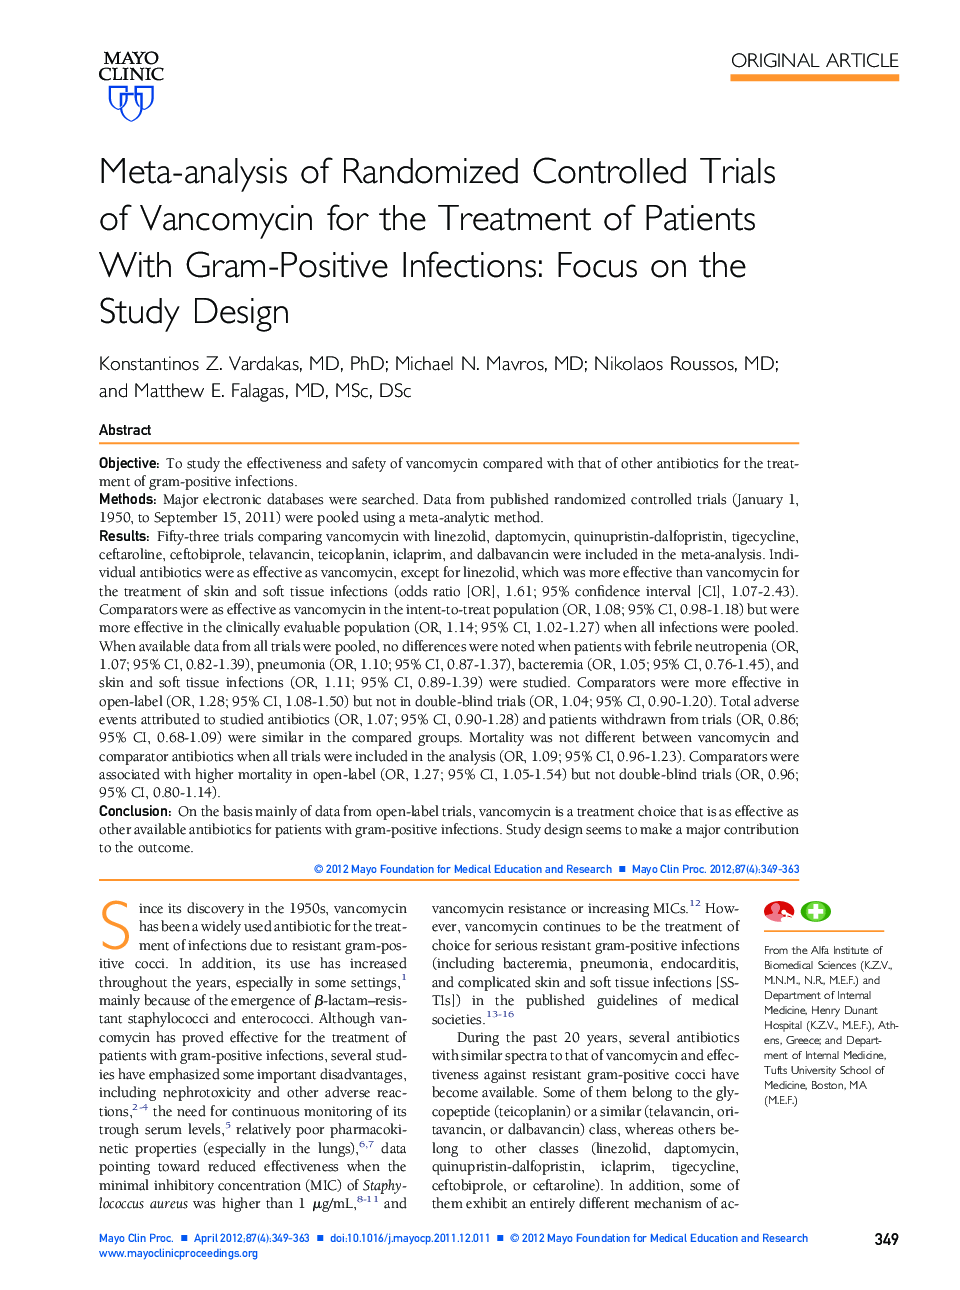 Meta-analysis of Randomized Controlled Trials of Vancomycin for the Treatment of Patients With Gram-Positive Infections: Focus on the Study Design